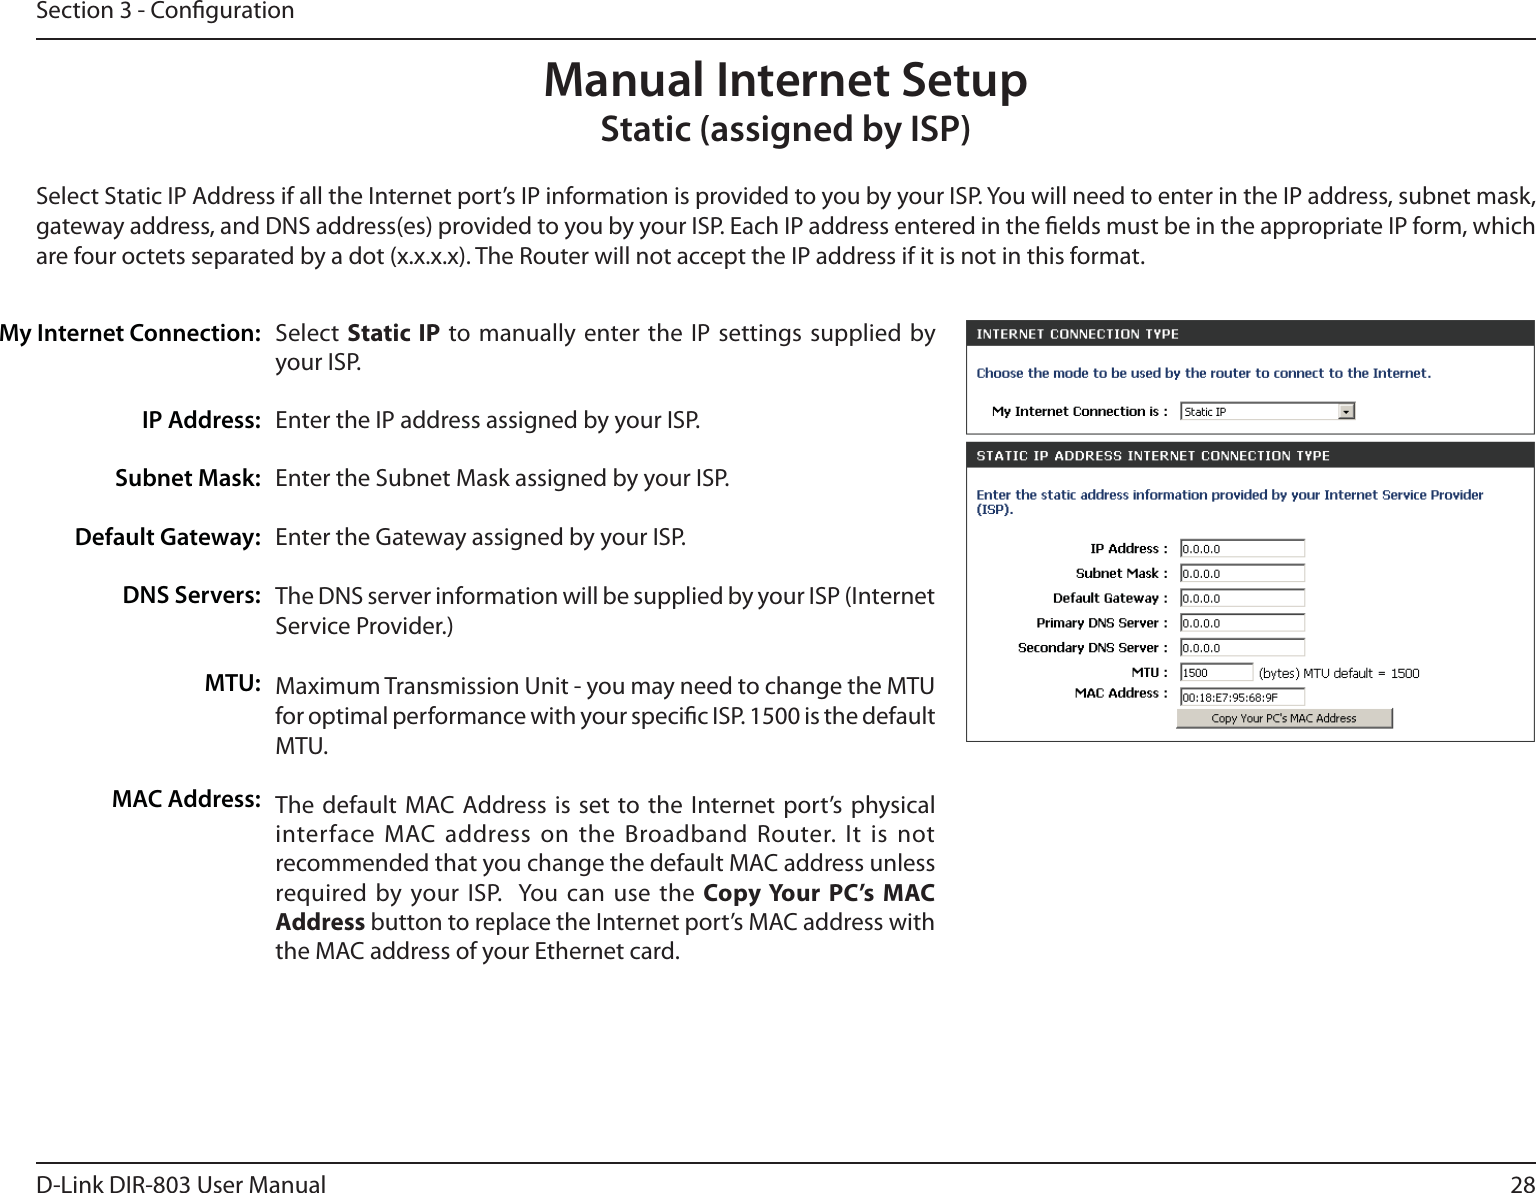 28D-Link DIR-803 User ManualSection 3 - CongurationSelect  Static IP to manually enter the IP settings supplied by your ISP.Enter the IP address assigned by your ISP.Enter the Subnet Mask assigned by your ISP.Enter the Gateway assigned by your ISP.The DNS server information will be supplied by your ISP (Internet Service Provider.)Maximum Transmission Unit - you may need to change the MTU for optimal performance with your specic ISP. 1500 is the default MTU.The default MAC Address is set to the Internet port’s physical interface MAC address on the Broadband Router. It is not recommended that you change the default MAC address unless required by your ISP.  You can use the Copy Your PC’s MAC Address button to replace the Internet port’s MAC address with the MAC address of your Ethernet card.My Internet Connection:IP Address:Subnet Mask:Default Gateway:DNS Servers:MTU:MAC Address:Manual Internet SetupStatic (assigned by ISP)Select Static IP Address if all the Internet port’s IP information is provided to you by your ISP. You will need to enter in the IP address, subnet mask, gateway address, and DNS address(es) provided to you by your ISP. Each IP address entered in the elds must be in the appropriate IP form, which are four octets separated by a dot (x.x.x.x). The Router will not accept the IP address if it is not in this format.